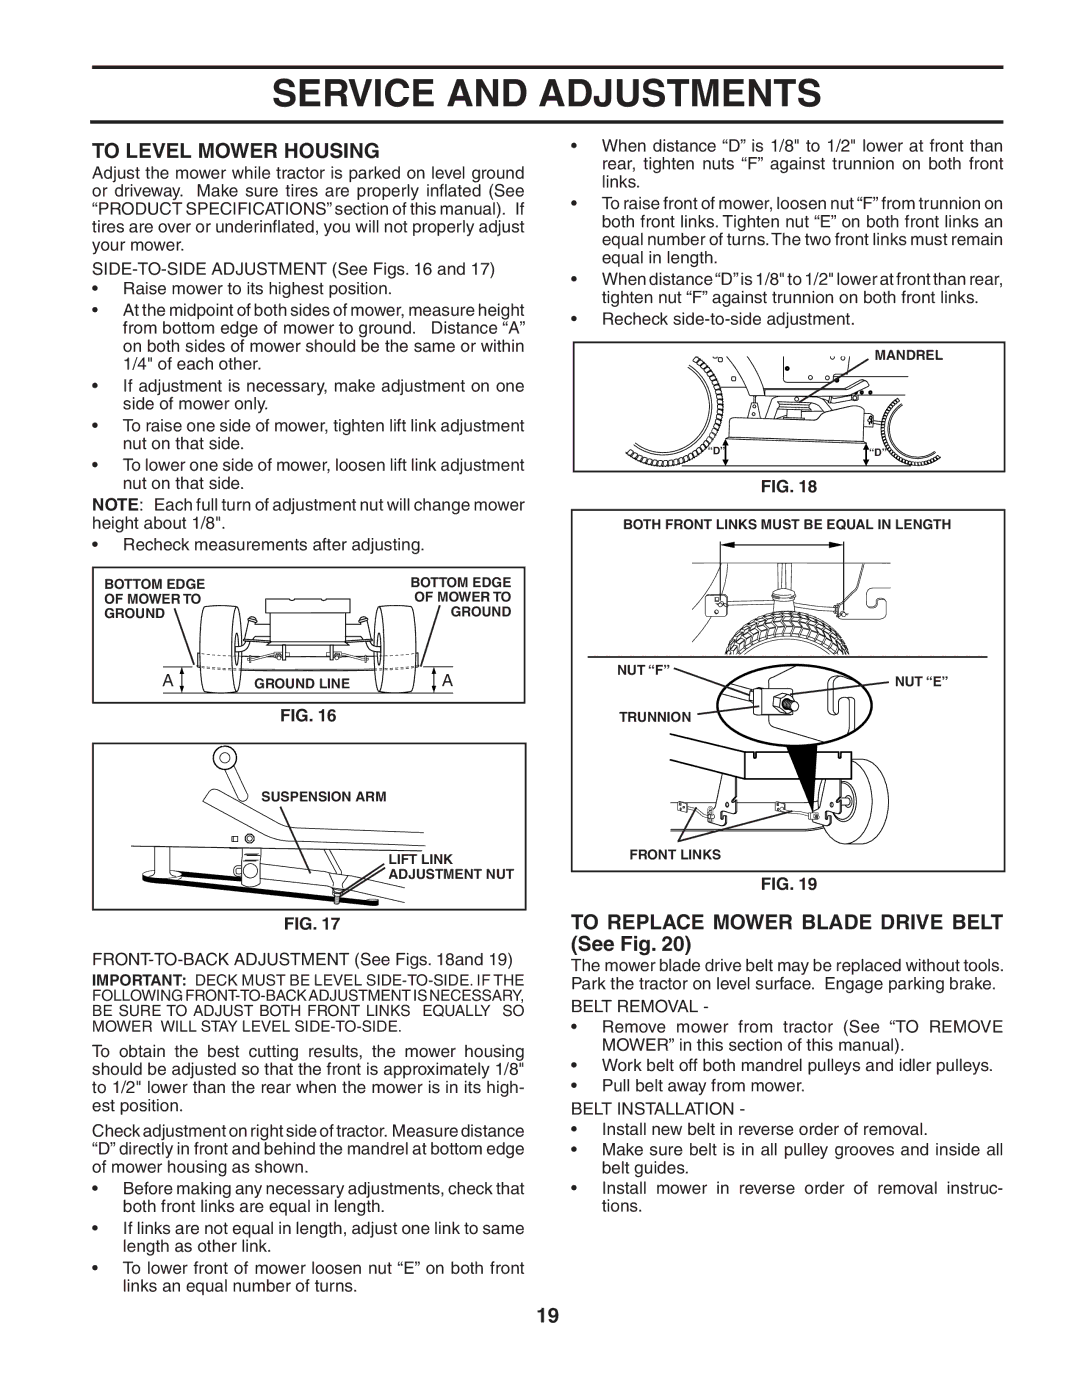 Poulan 186890 manual To Level Mower Housing, To Replace Mower Blade Drive Belt See Fig, Belt Removal, Belt Installation 